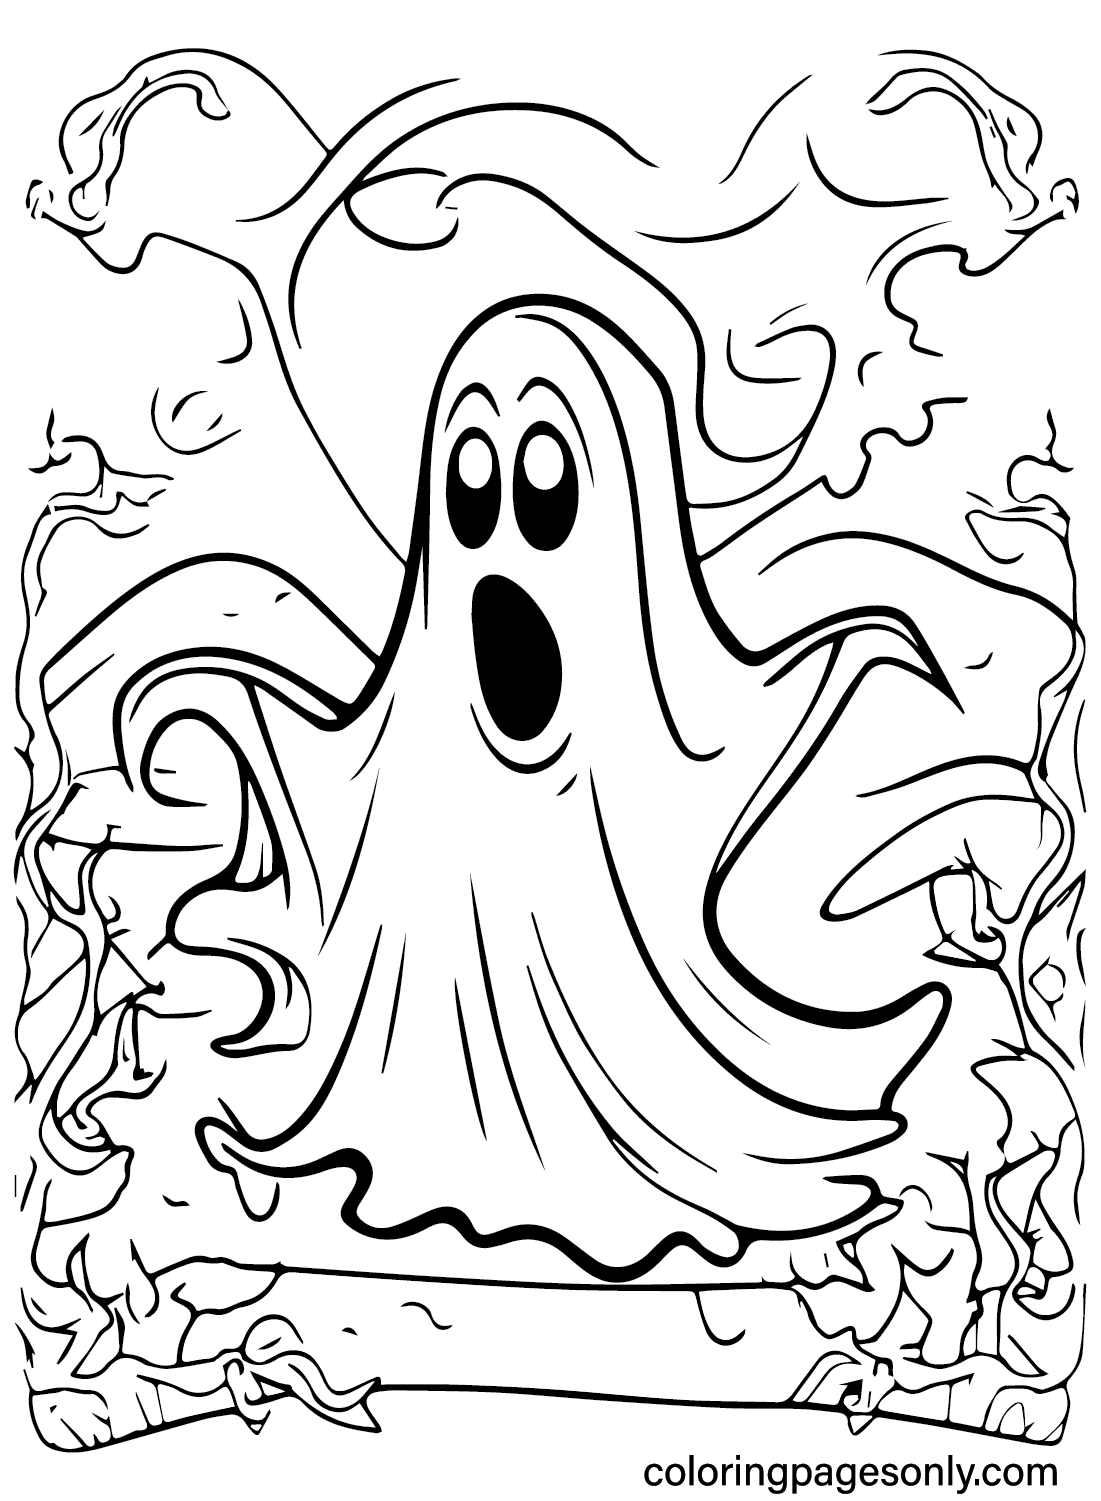 Scary Halloween Coloring Book Page